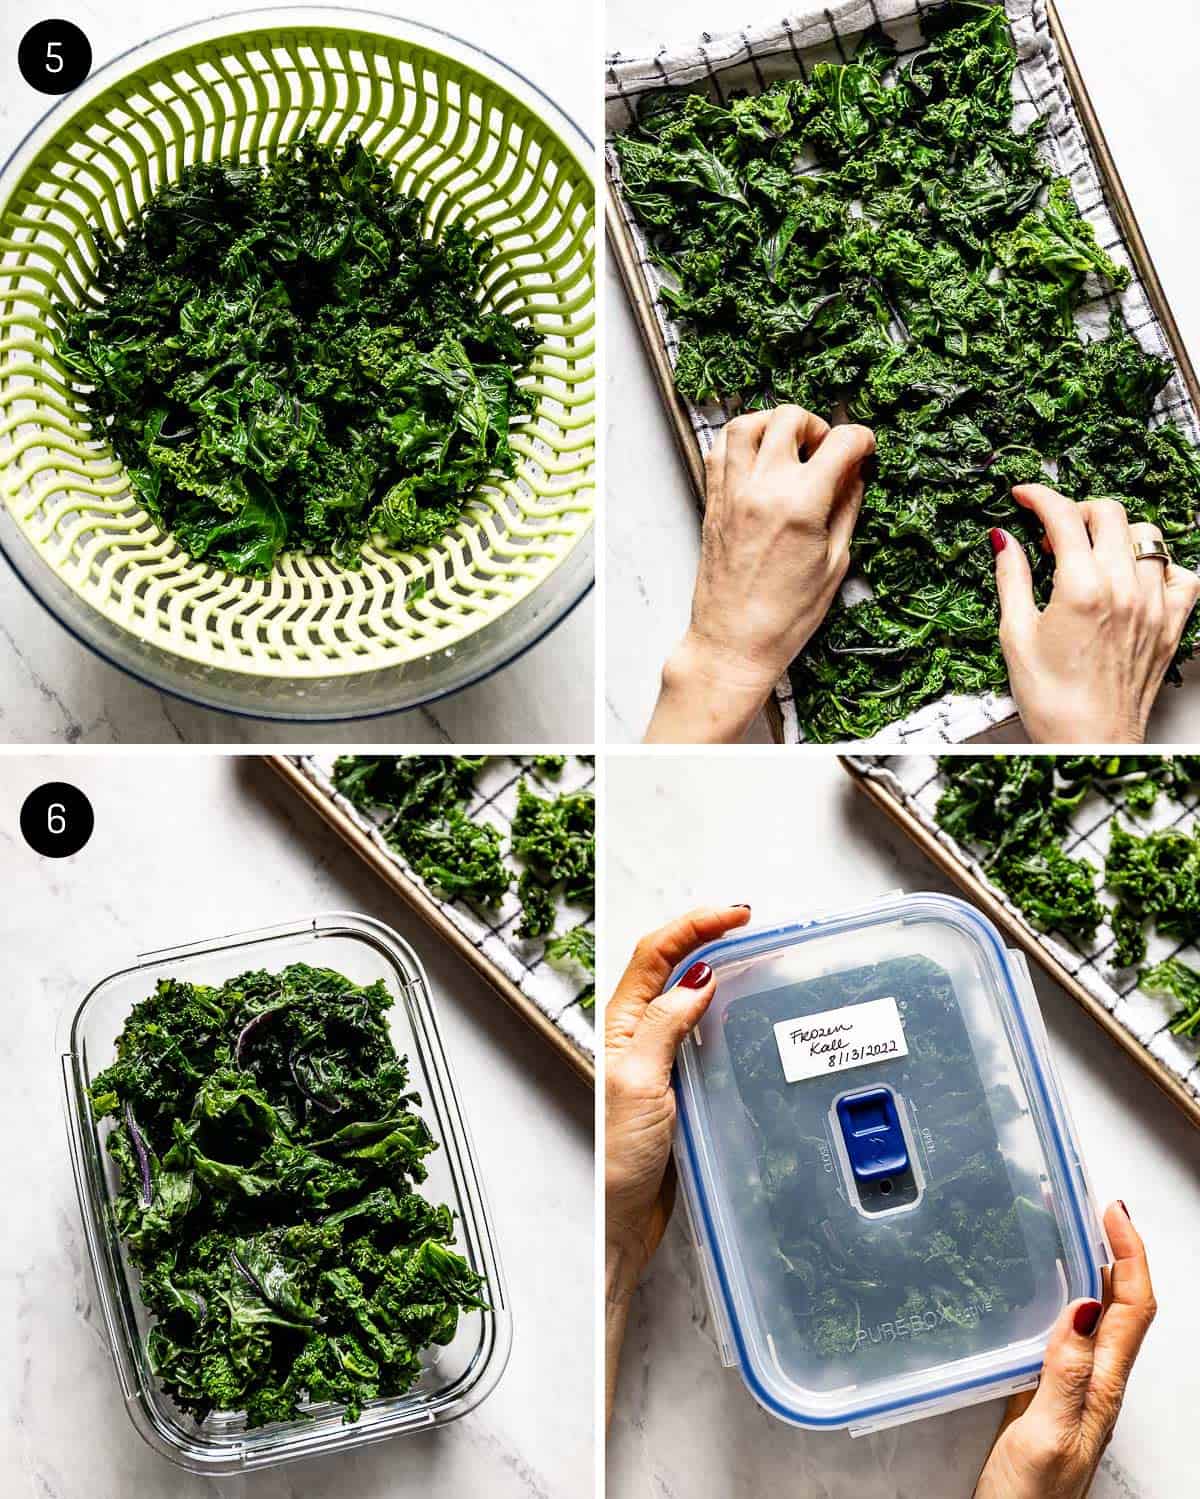 A person drying kale leaves and storing them in an airtight container.